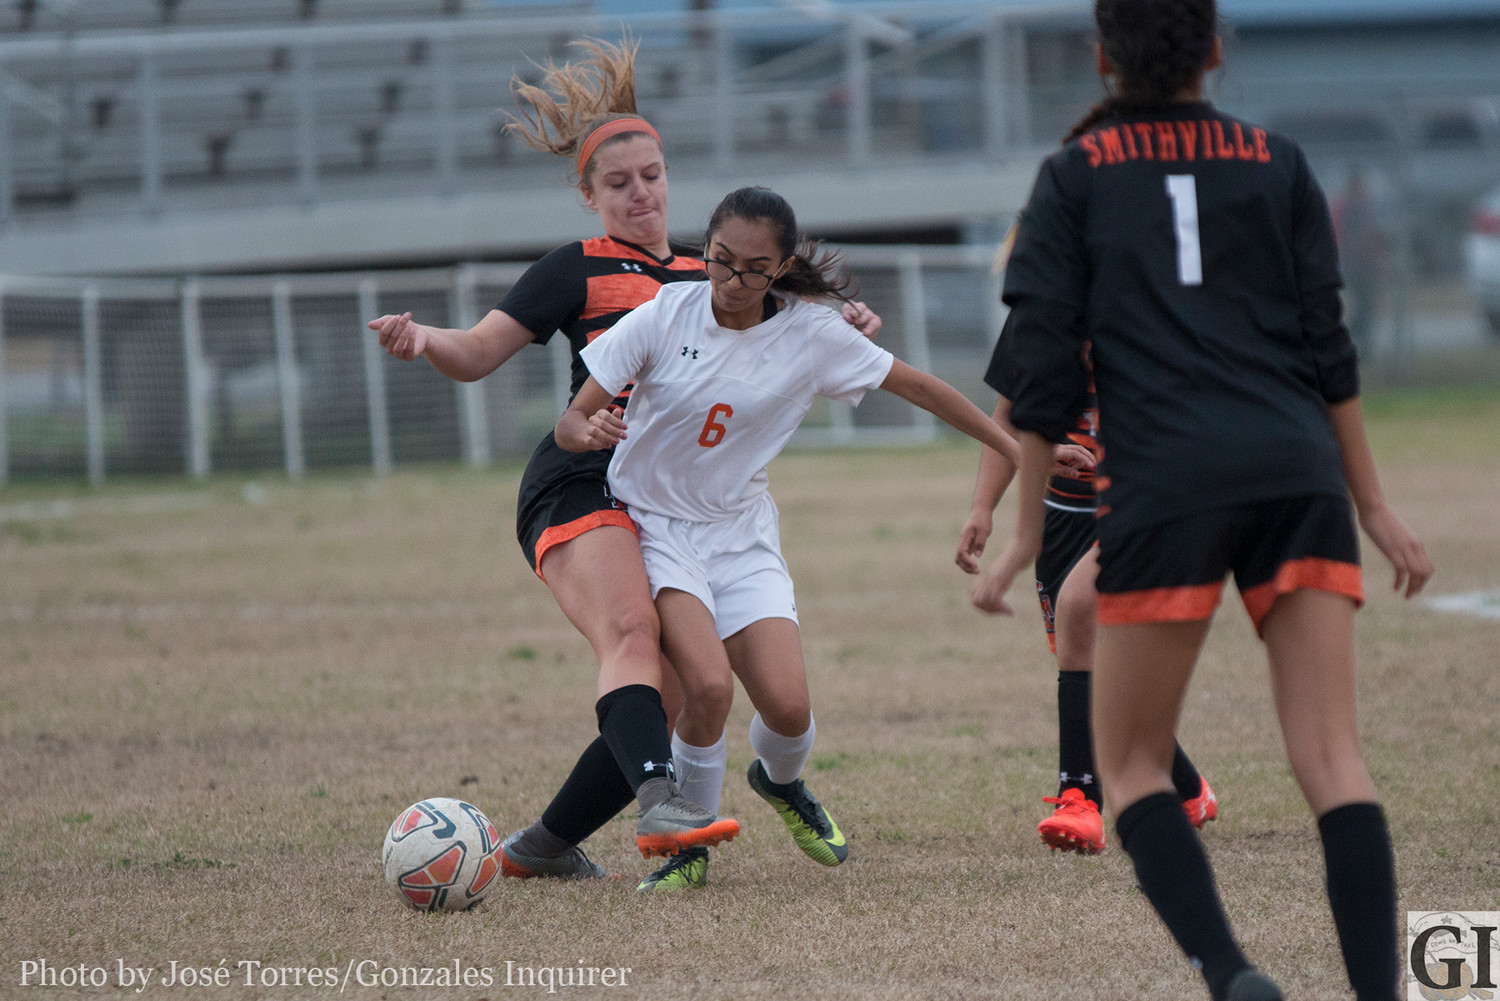 Samantha Gallegos fights for the ball.